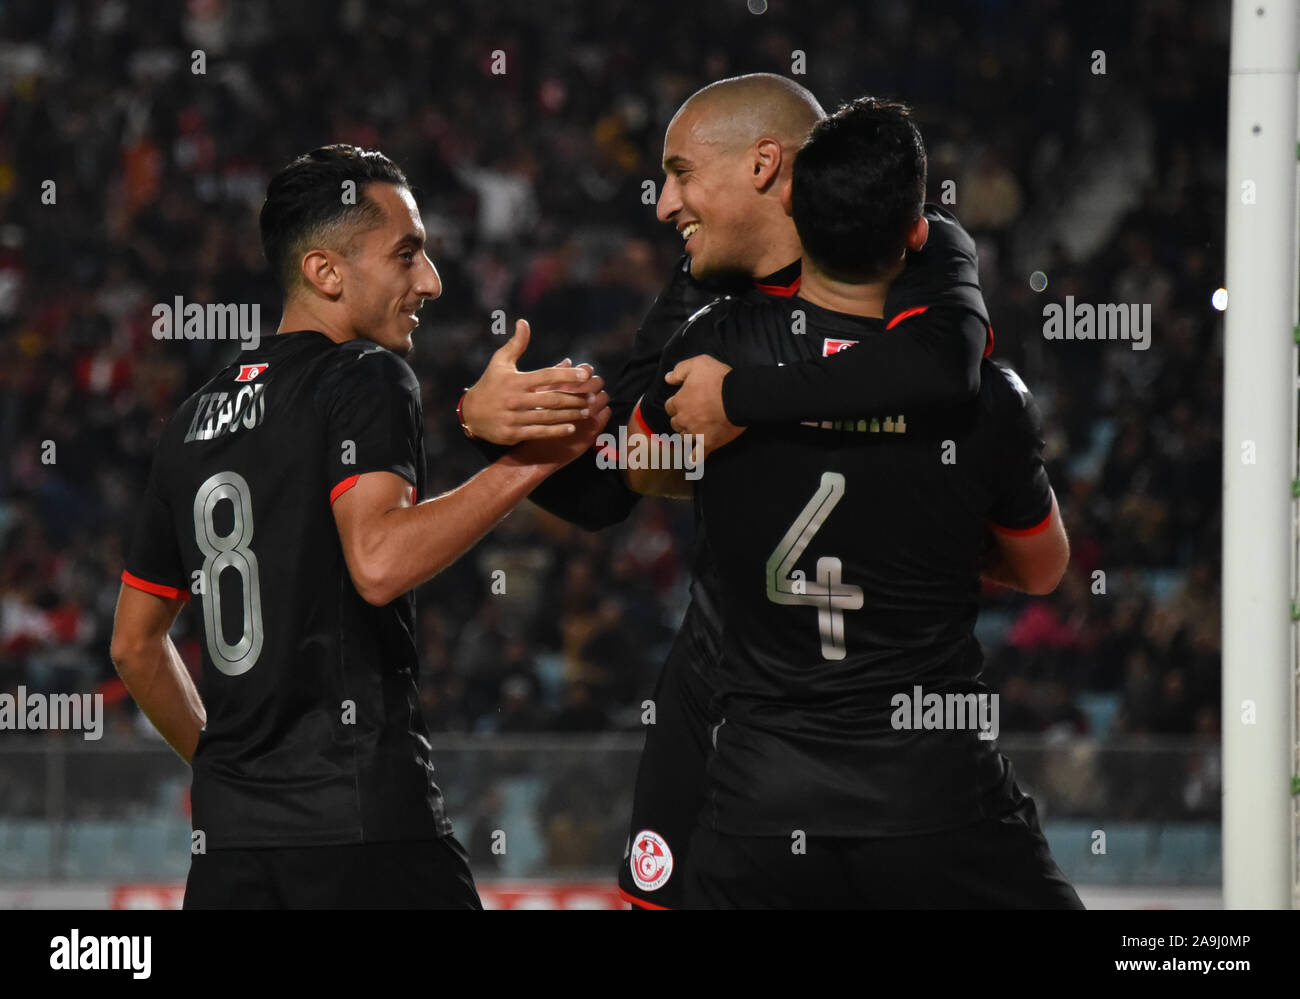 Tunis, Tunisia. 15th Nov, 2019. Tunisia's forward Wahbi Khazri celebrates with his team mates after scoring during the 2021 Africa Cup of Nations group J qualifying football match between Tunisia and Libya at the Stade Olympique de Rades.(Final score; Tunisia 4:1 Libya) Credit: SOPA Images Limited/Alamy Live News Stock Photo